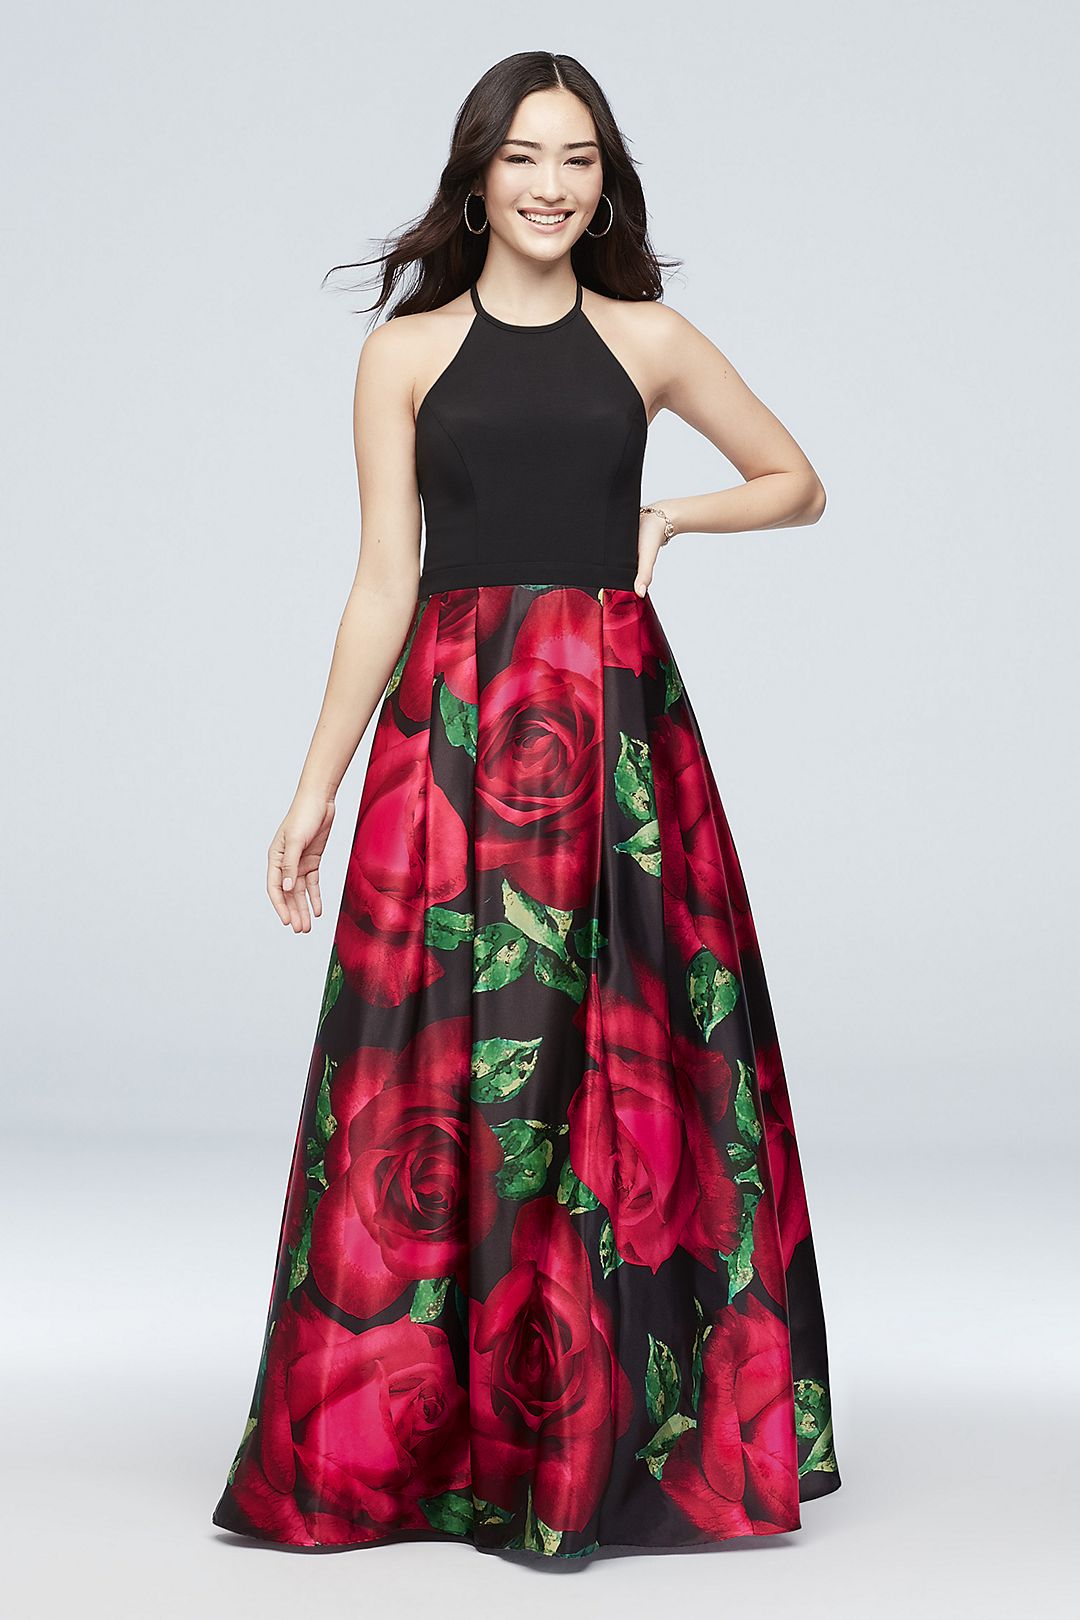 Printed Satin Tie-Neck Halter Ball Gown Image 4